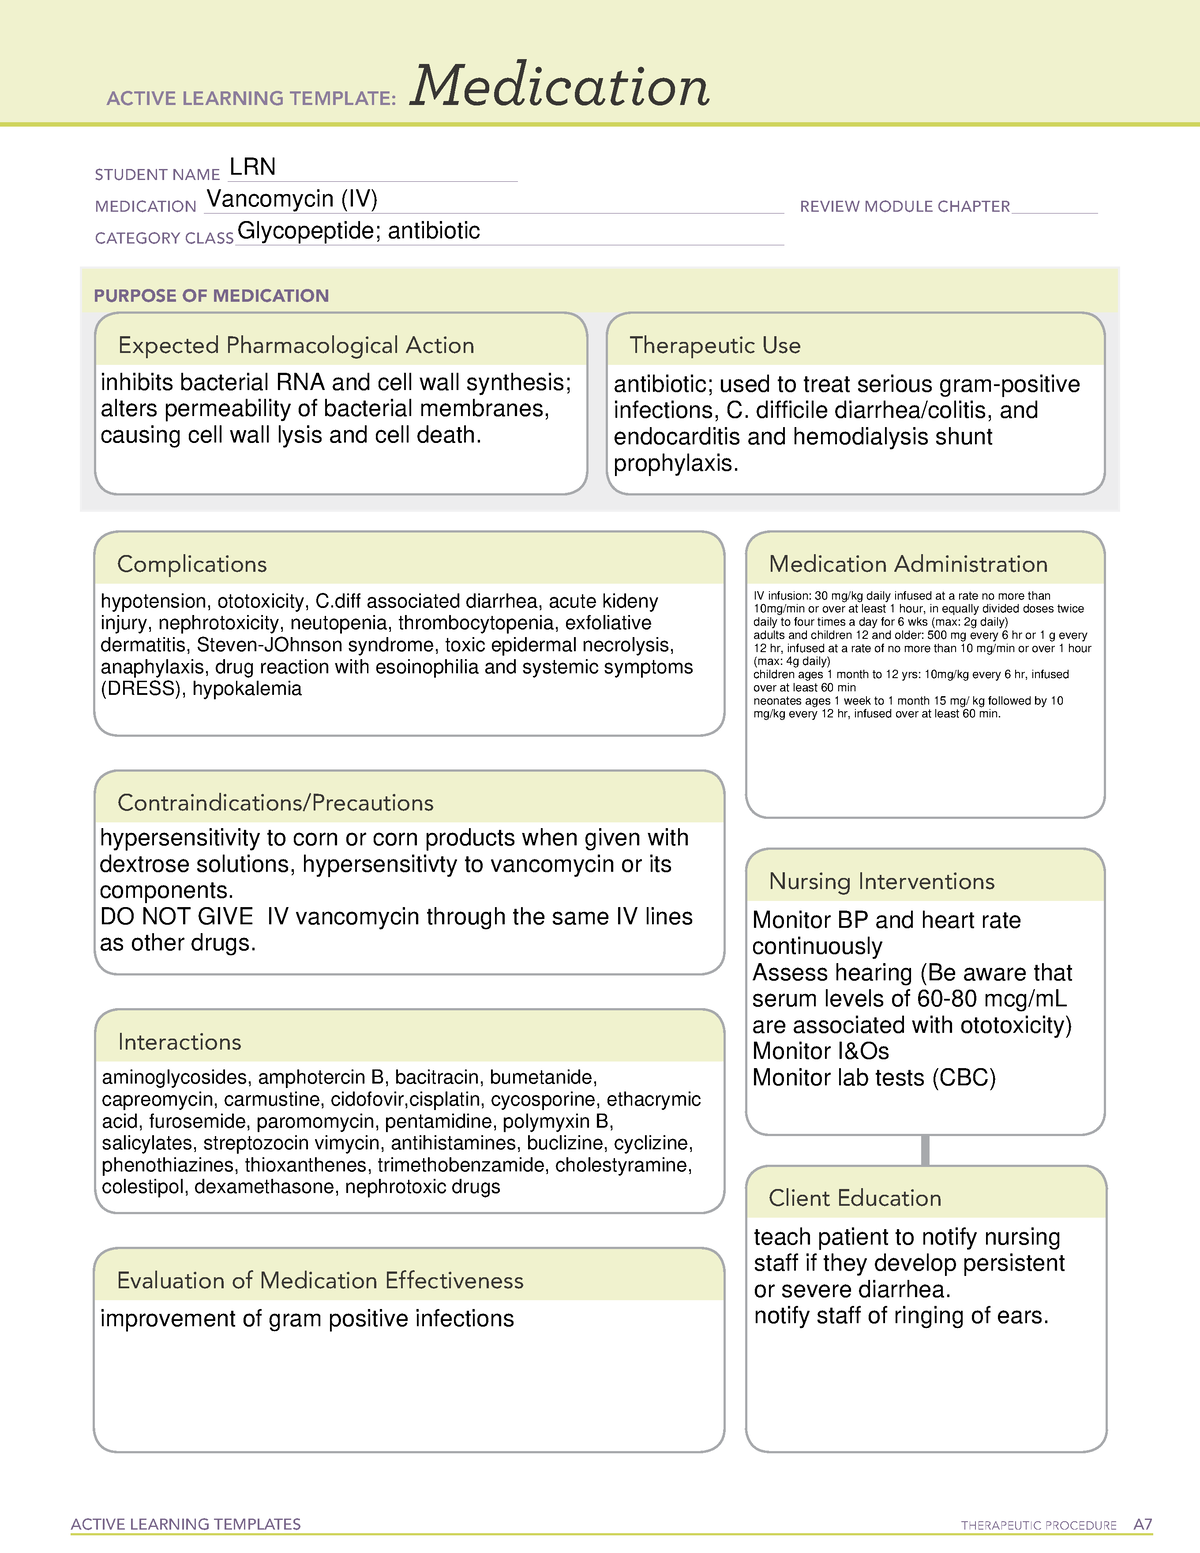 ATI ALT MEDICATION ACTIVE LEARNING TEMPLATES THERAPEUTIC